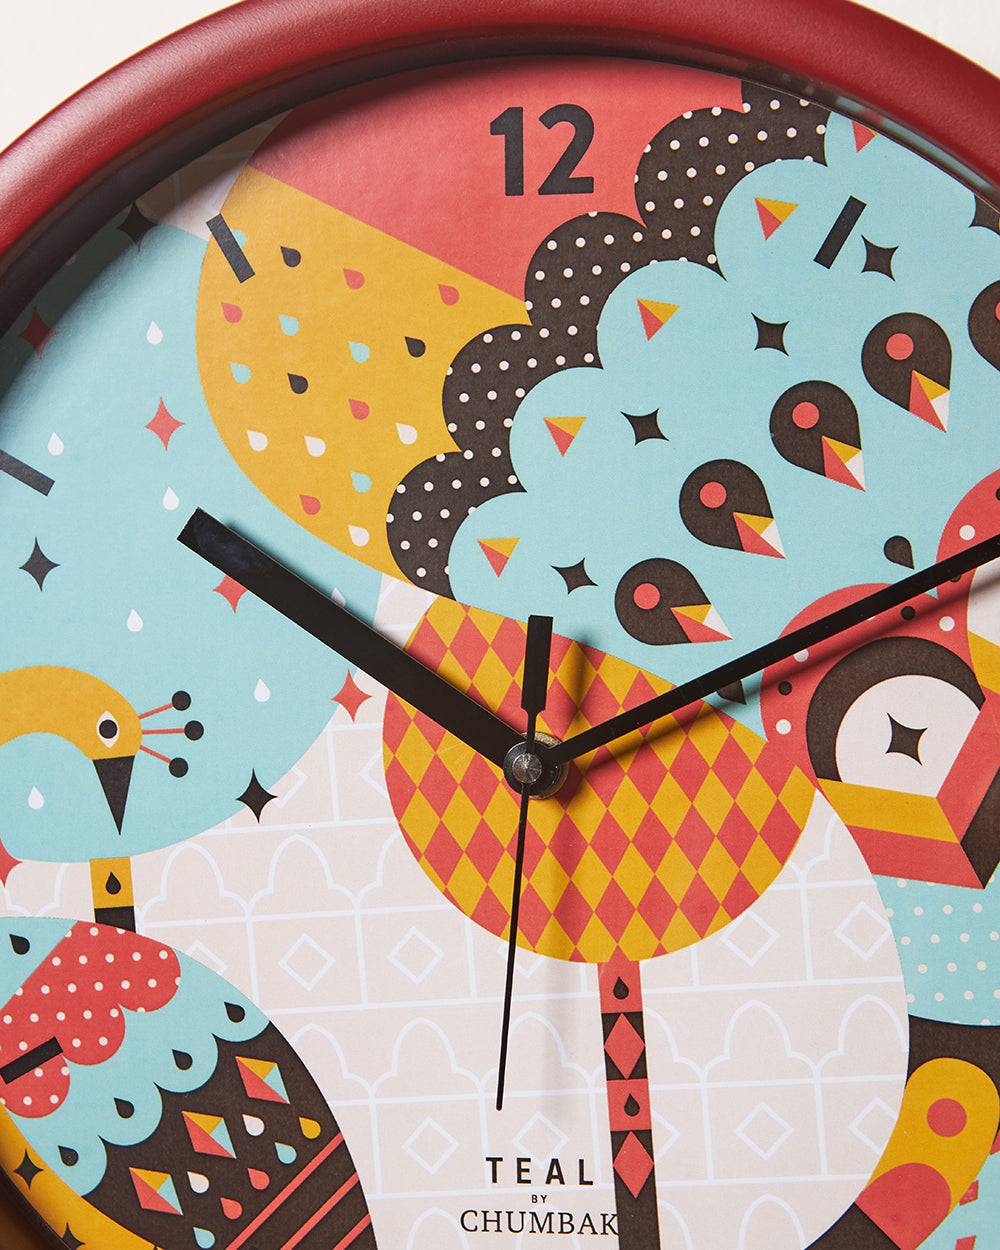 Teal by Chumbak |Peacock Pride Wall Clock | 11 inch